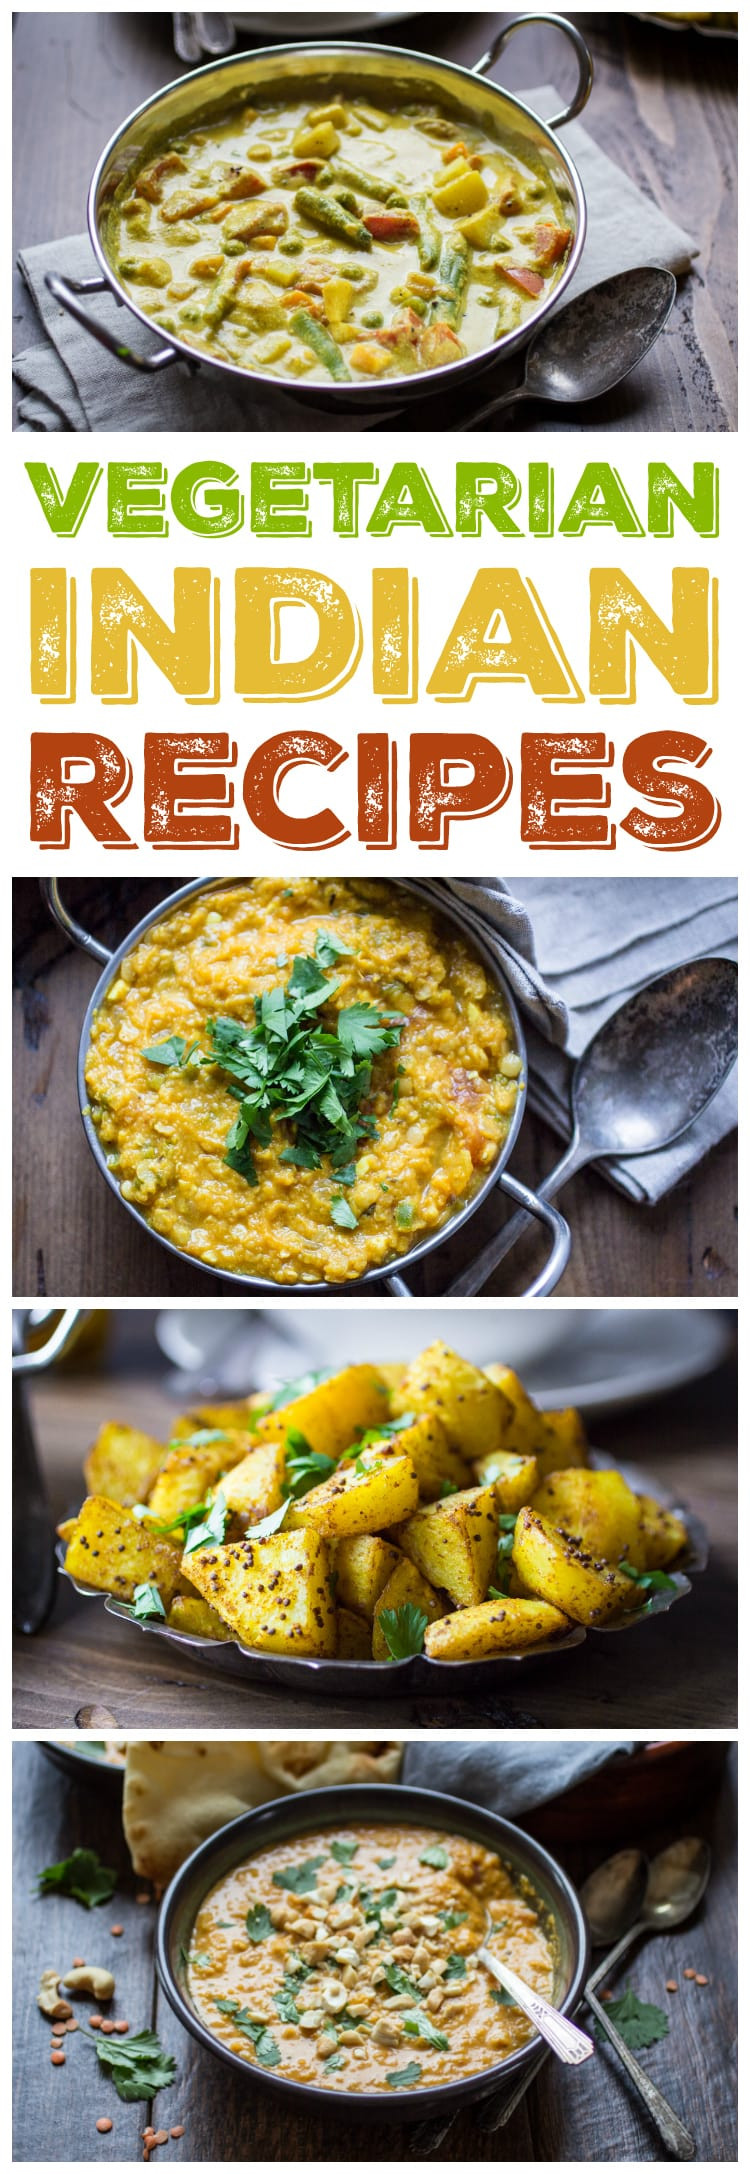 Easy Cheap Vegetarian Recipes
 10 Ve arian Indian Recipes to Make Again and Again The